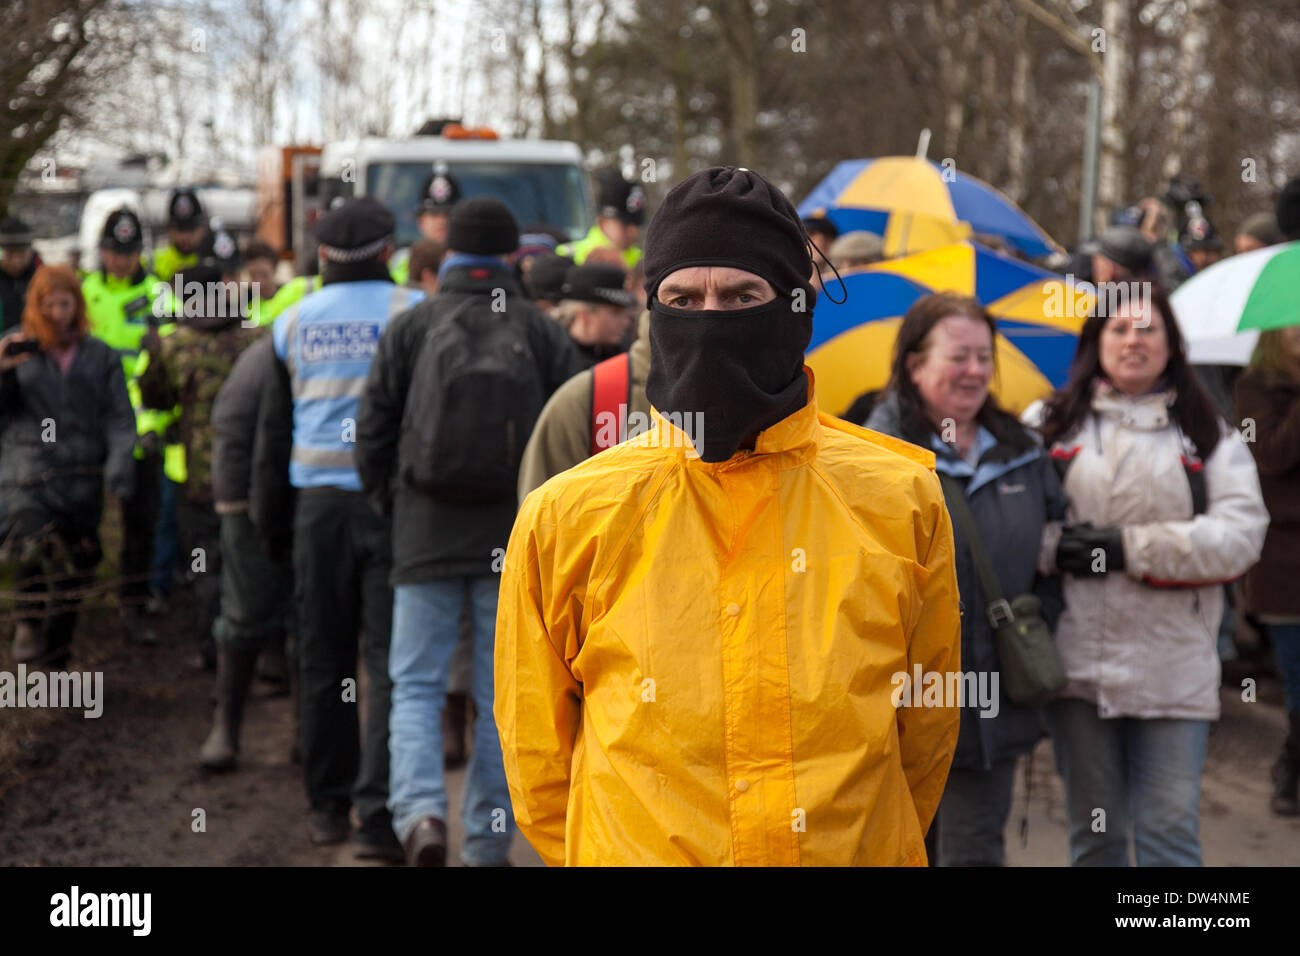 Manchester, Barton Moss, UK. 27th February, 2014. Masked protester delaying lorries as protests continue at IGAS Drilling Site.  Greater Manchester Policing operation at Barton Moss Drilling Site as protesters seek to delay and obstruct delivery vehicles and drilling equipment en-route to the controversial gas exploration site. Fracking protestors have set up a camp at Barton Moss Road, Eccles a potential methane-gas extraction site in Salford, Greater Manchester. Stock Photo